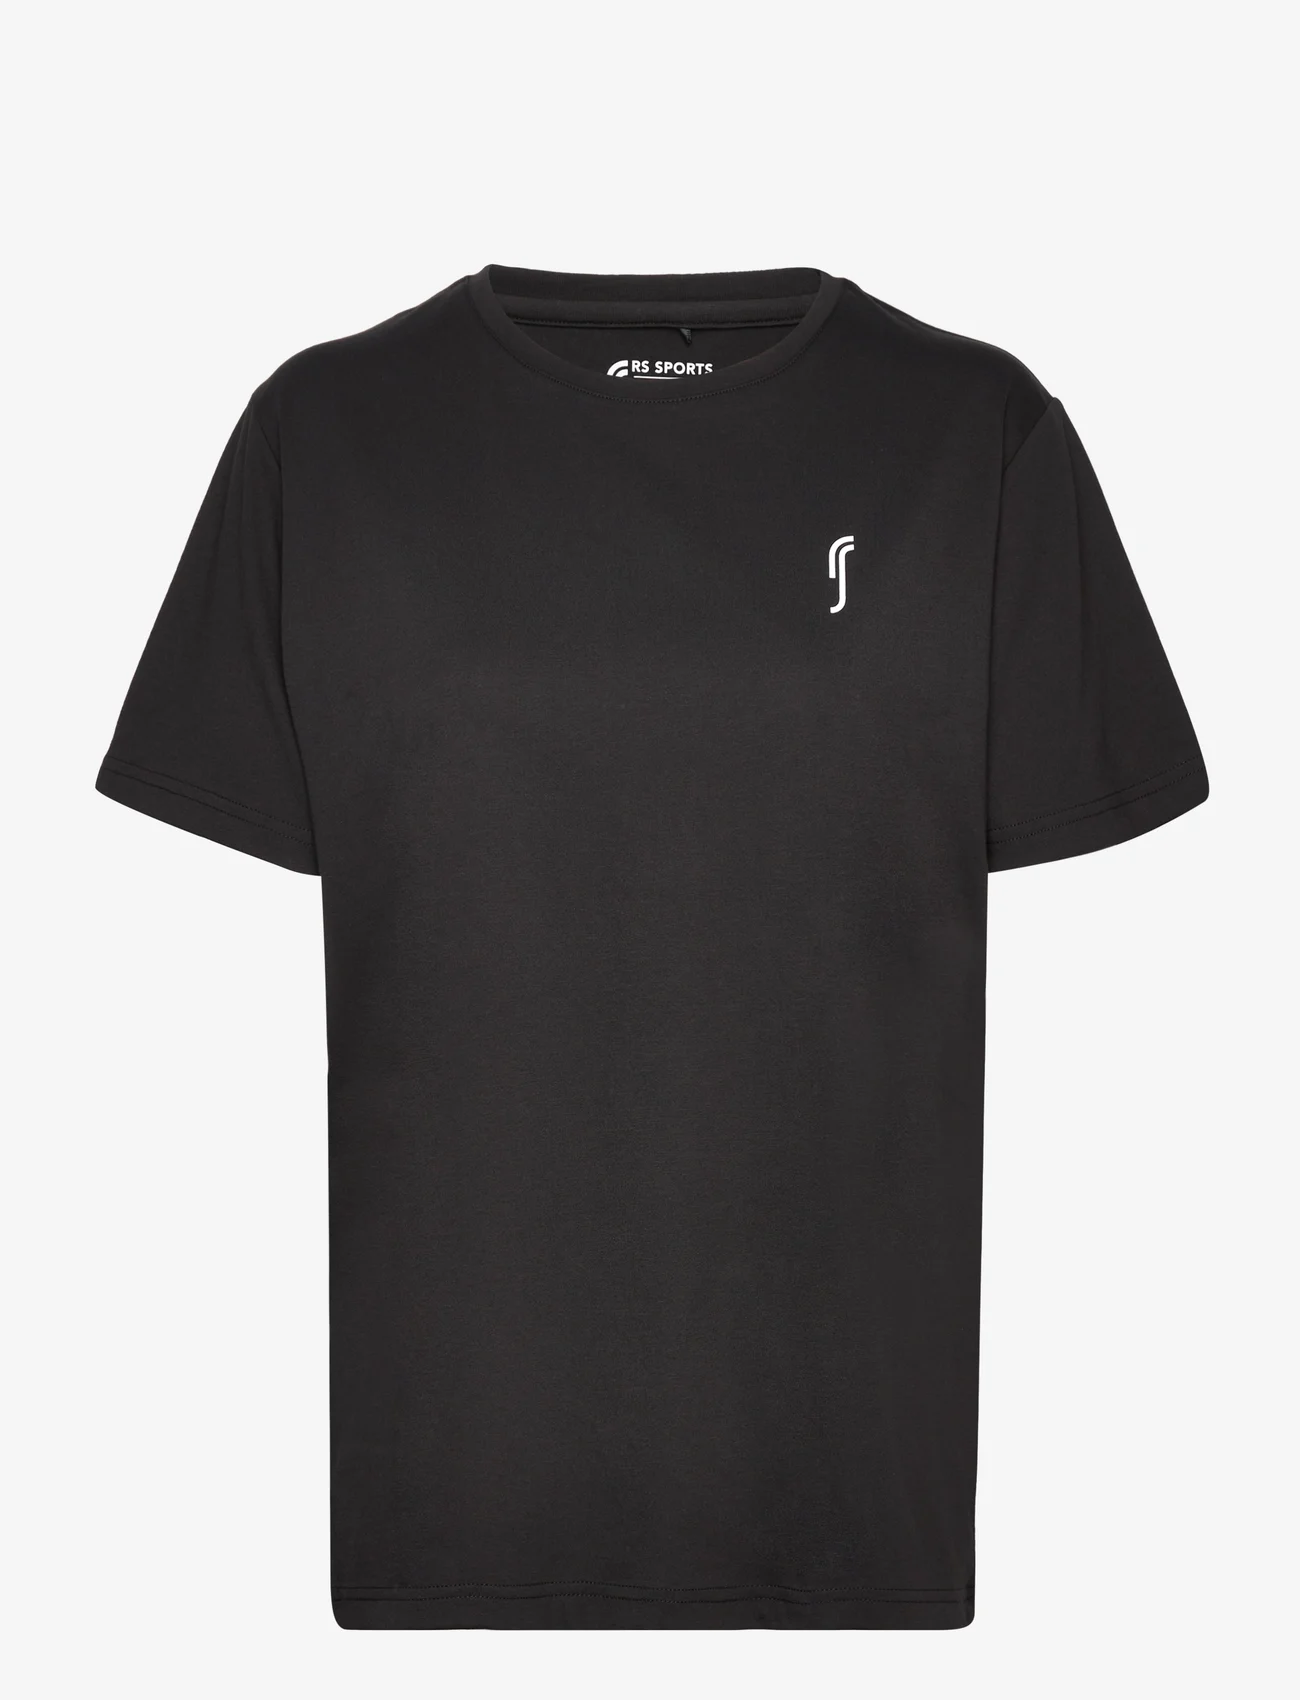 RS Sports - Men’s Cotton Tee - short-sleeved t-shirts - black - 0